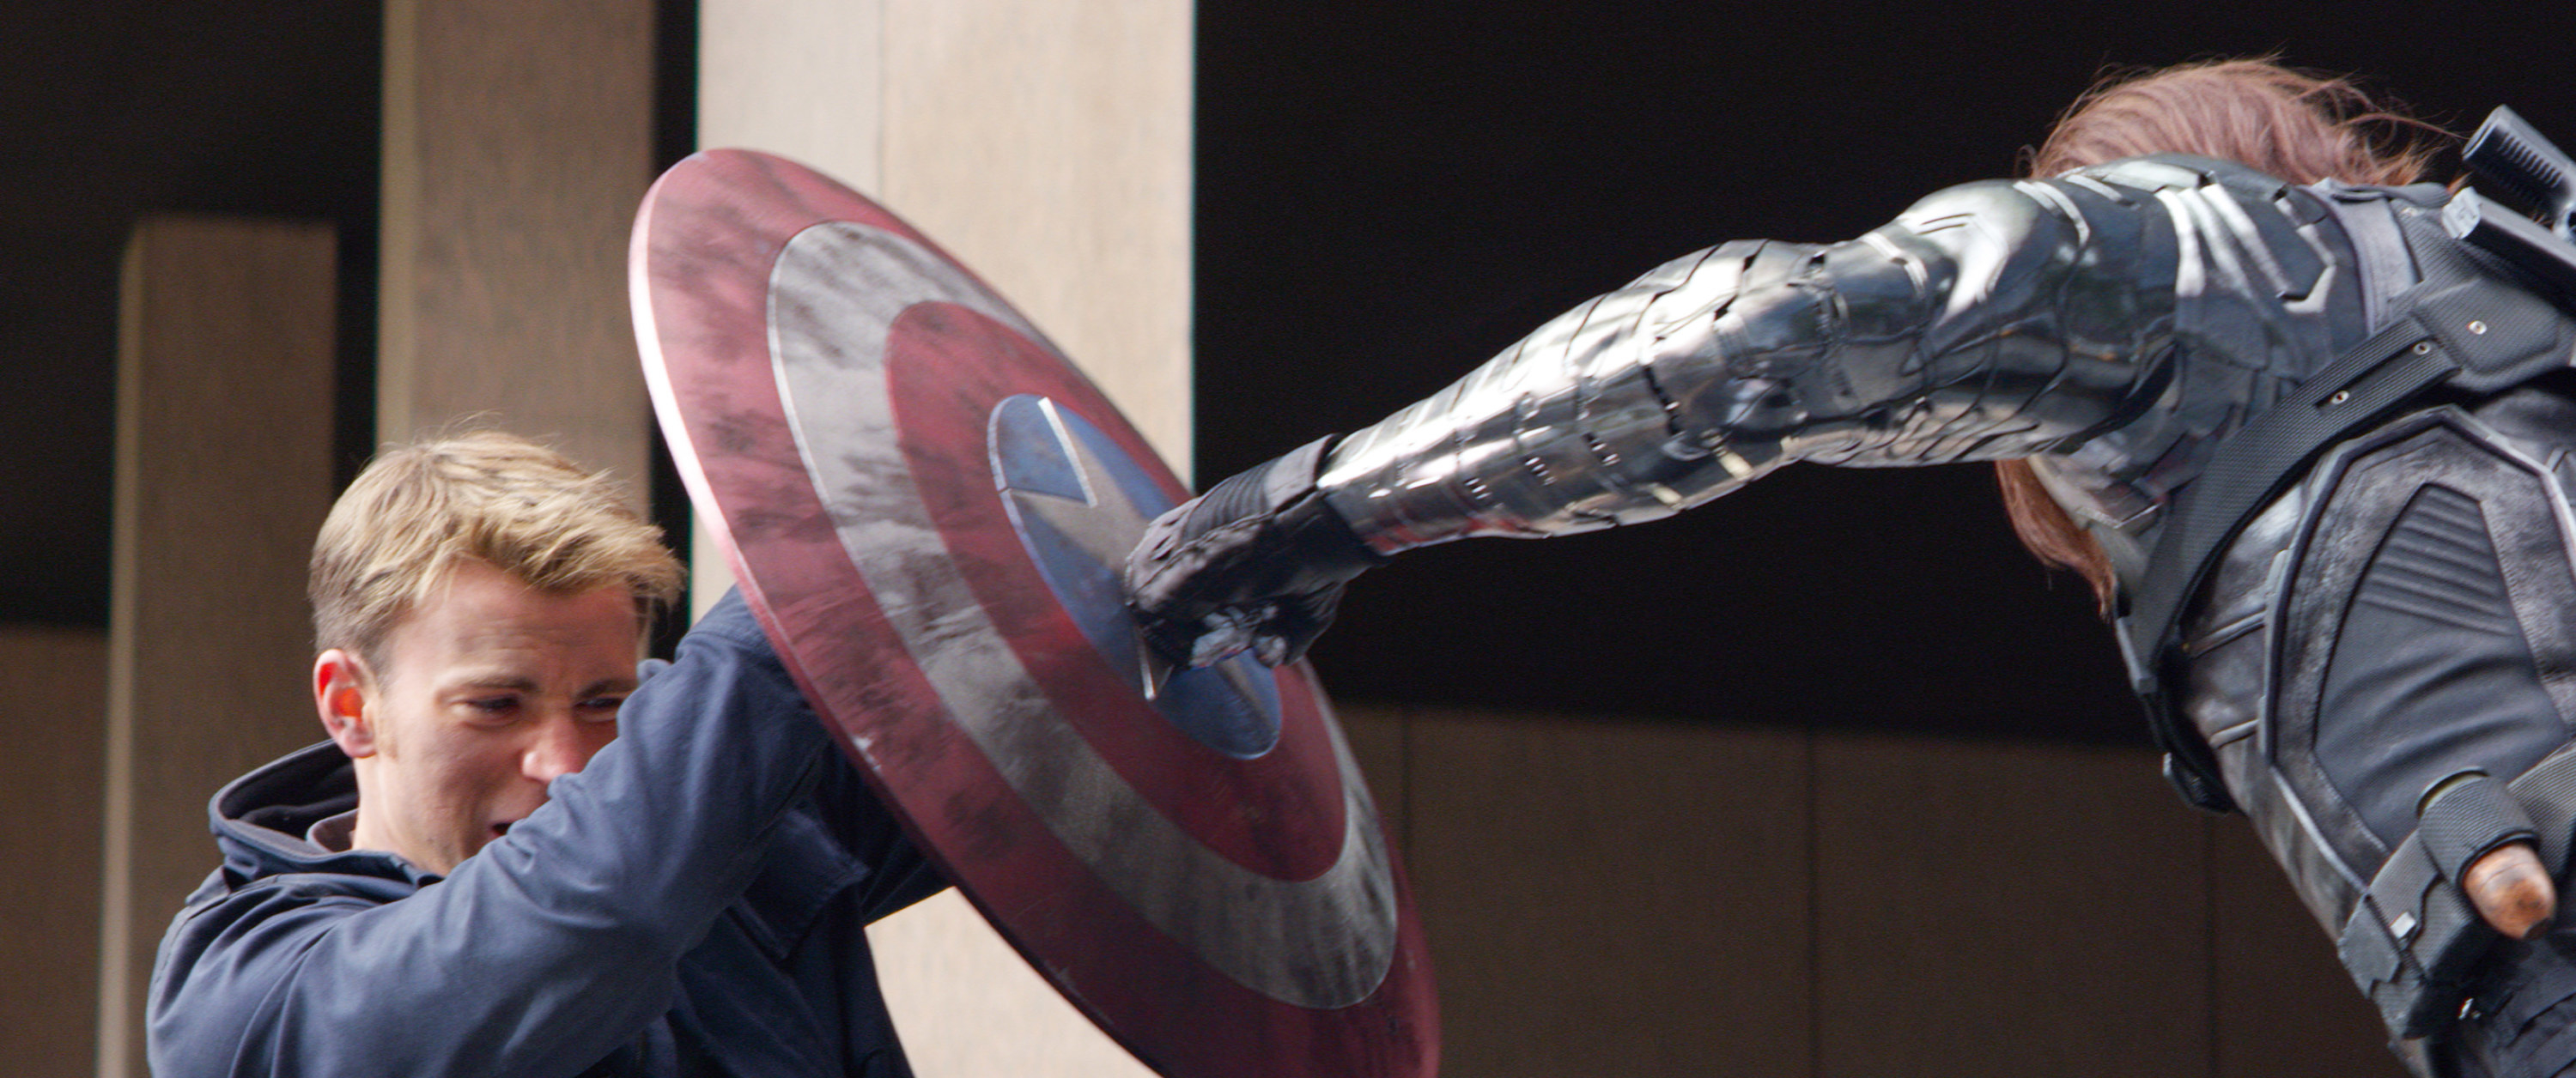 Captain America blocks a punch from the Winter Soldier with his shield